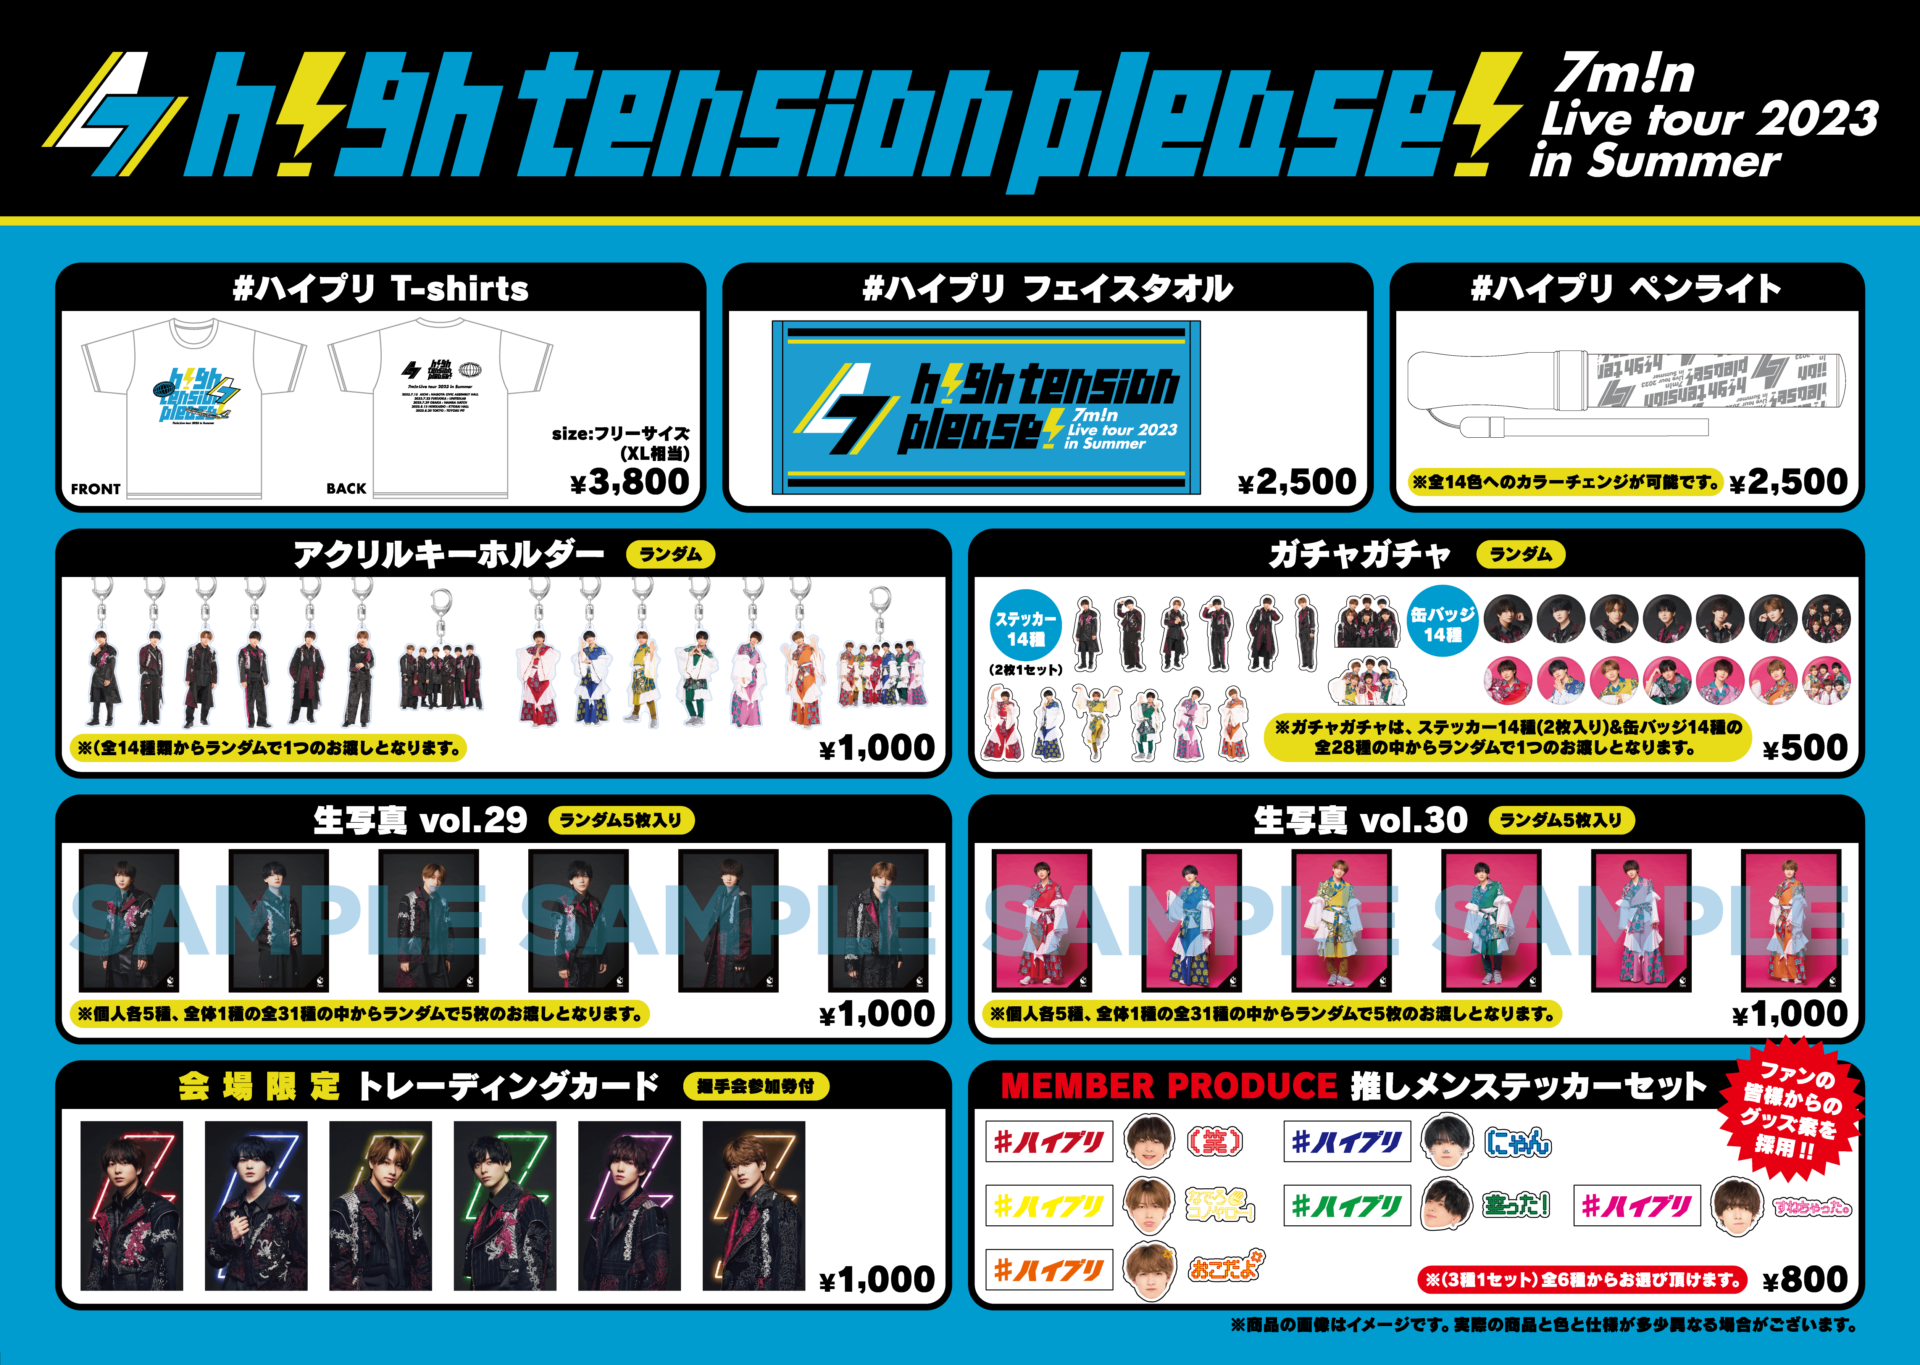 7m!n Live Tour 2023 in Summer~h!gh tension please!~】Official